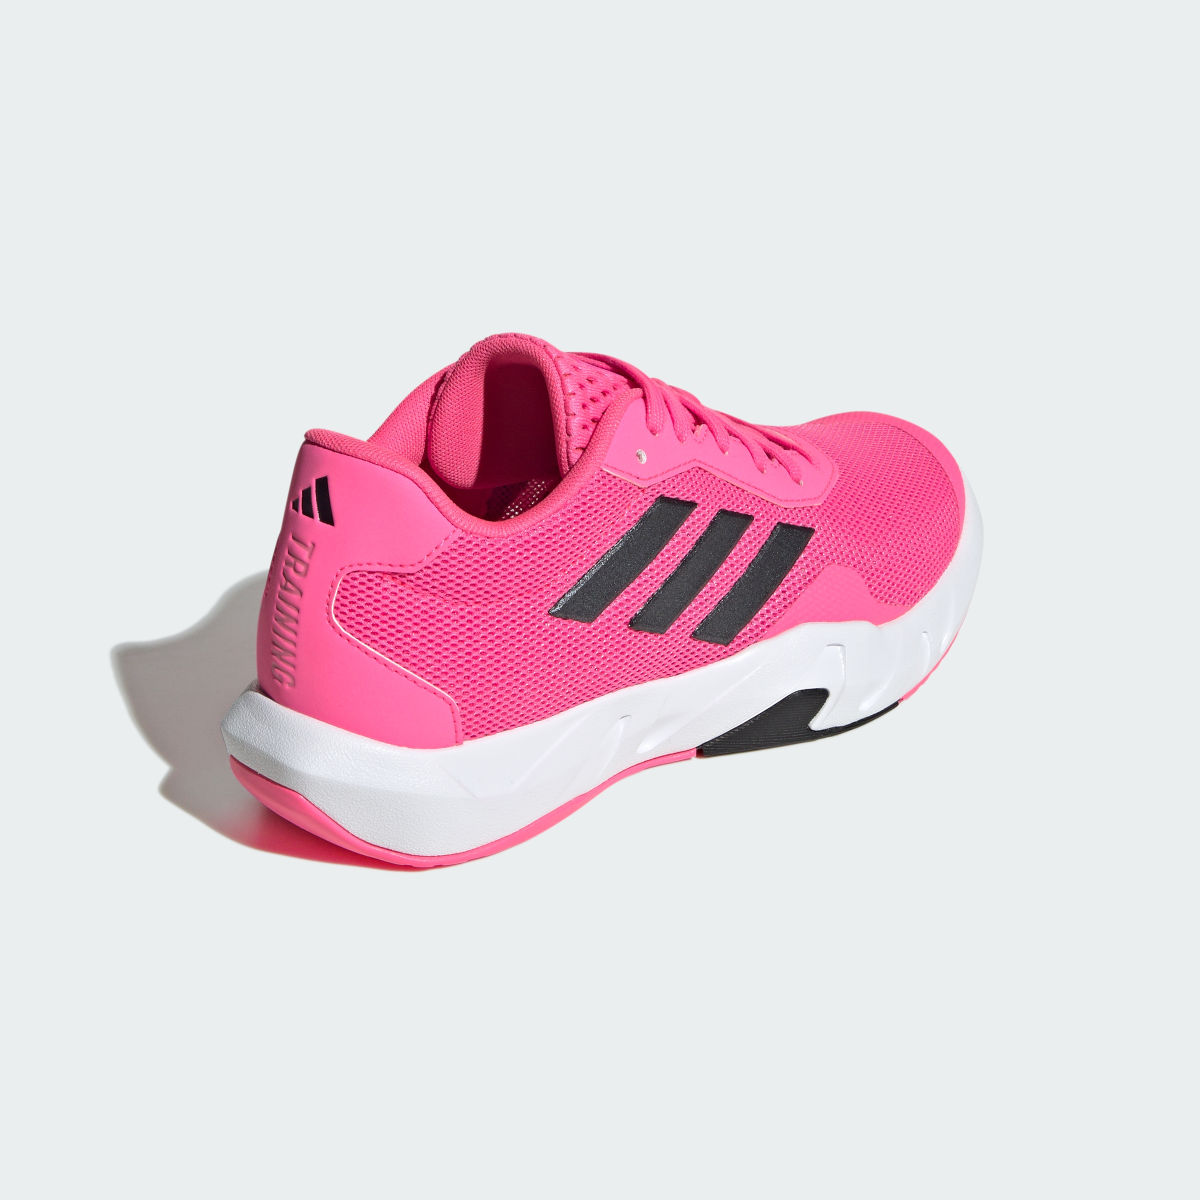 Adidas Amplimove Trainer Shoes. 6